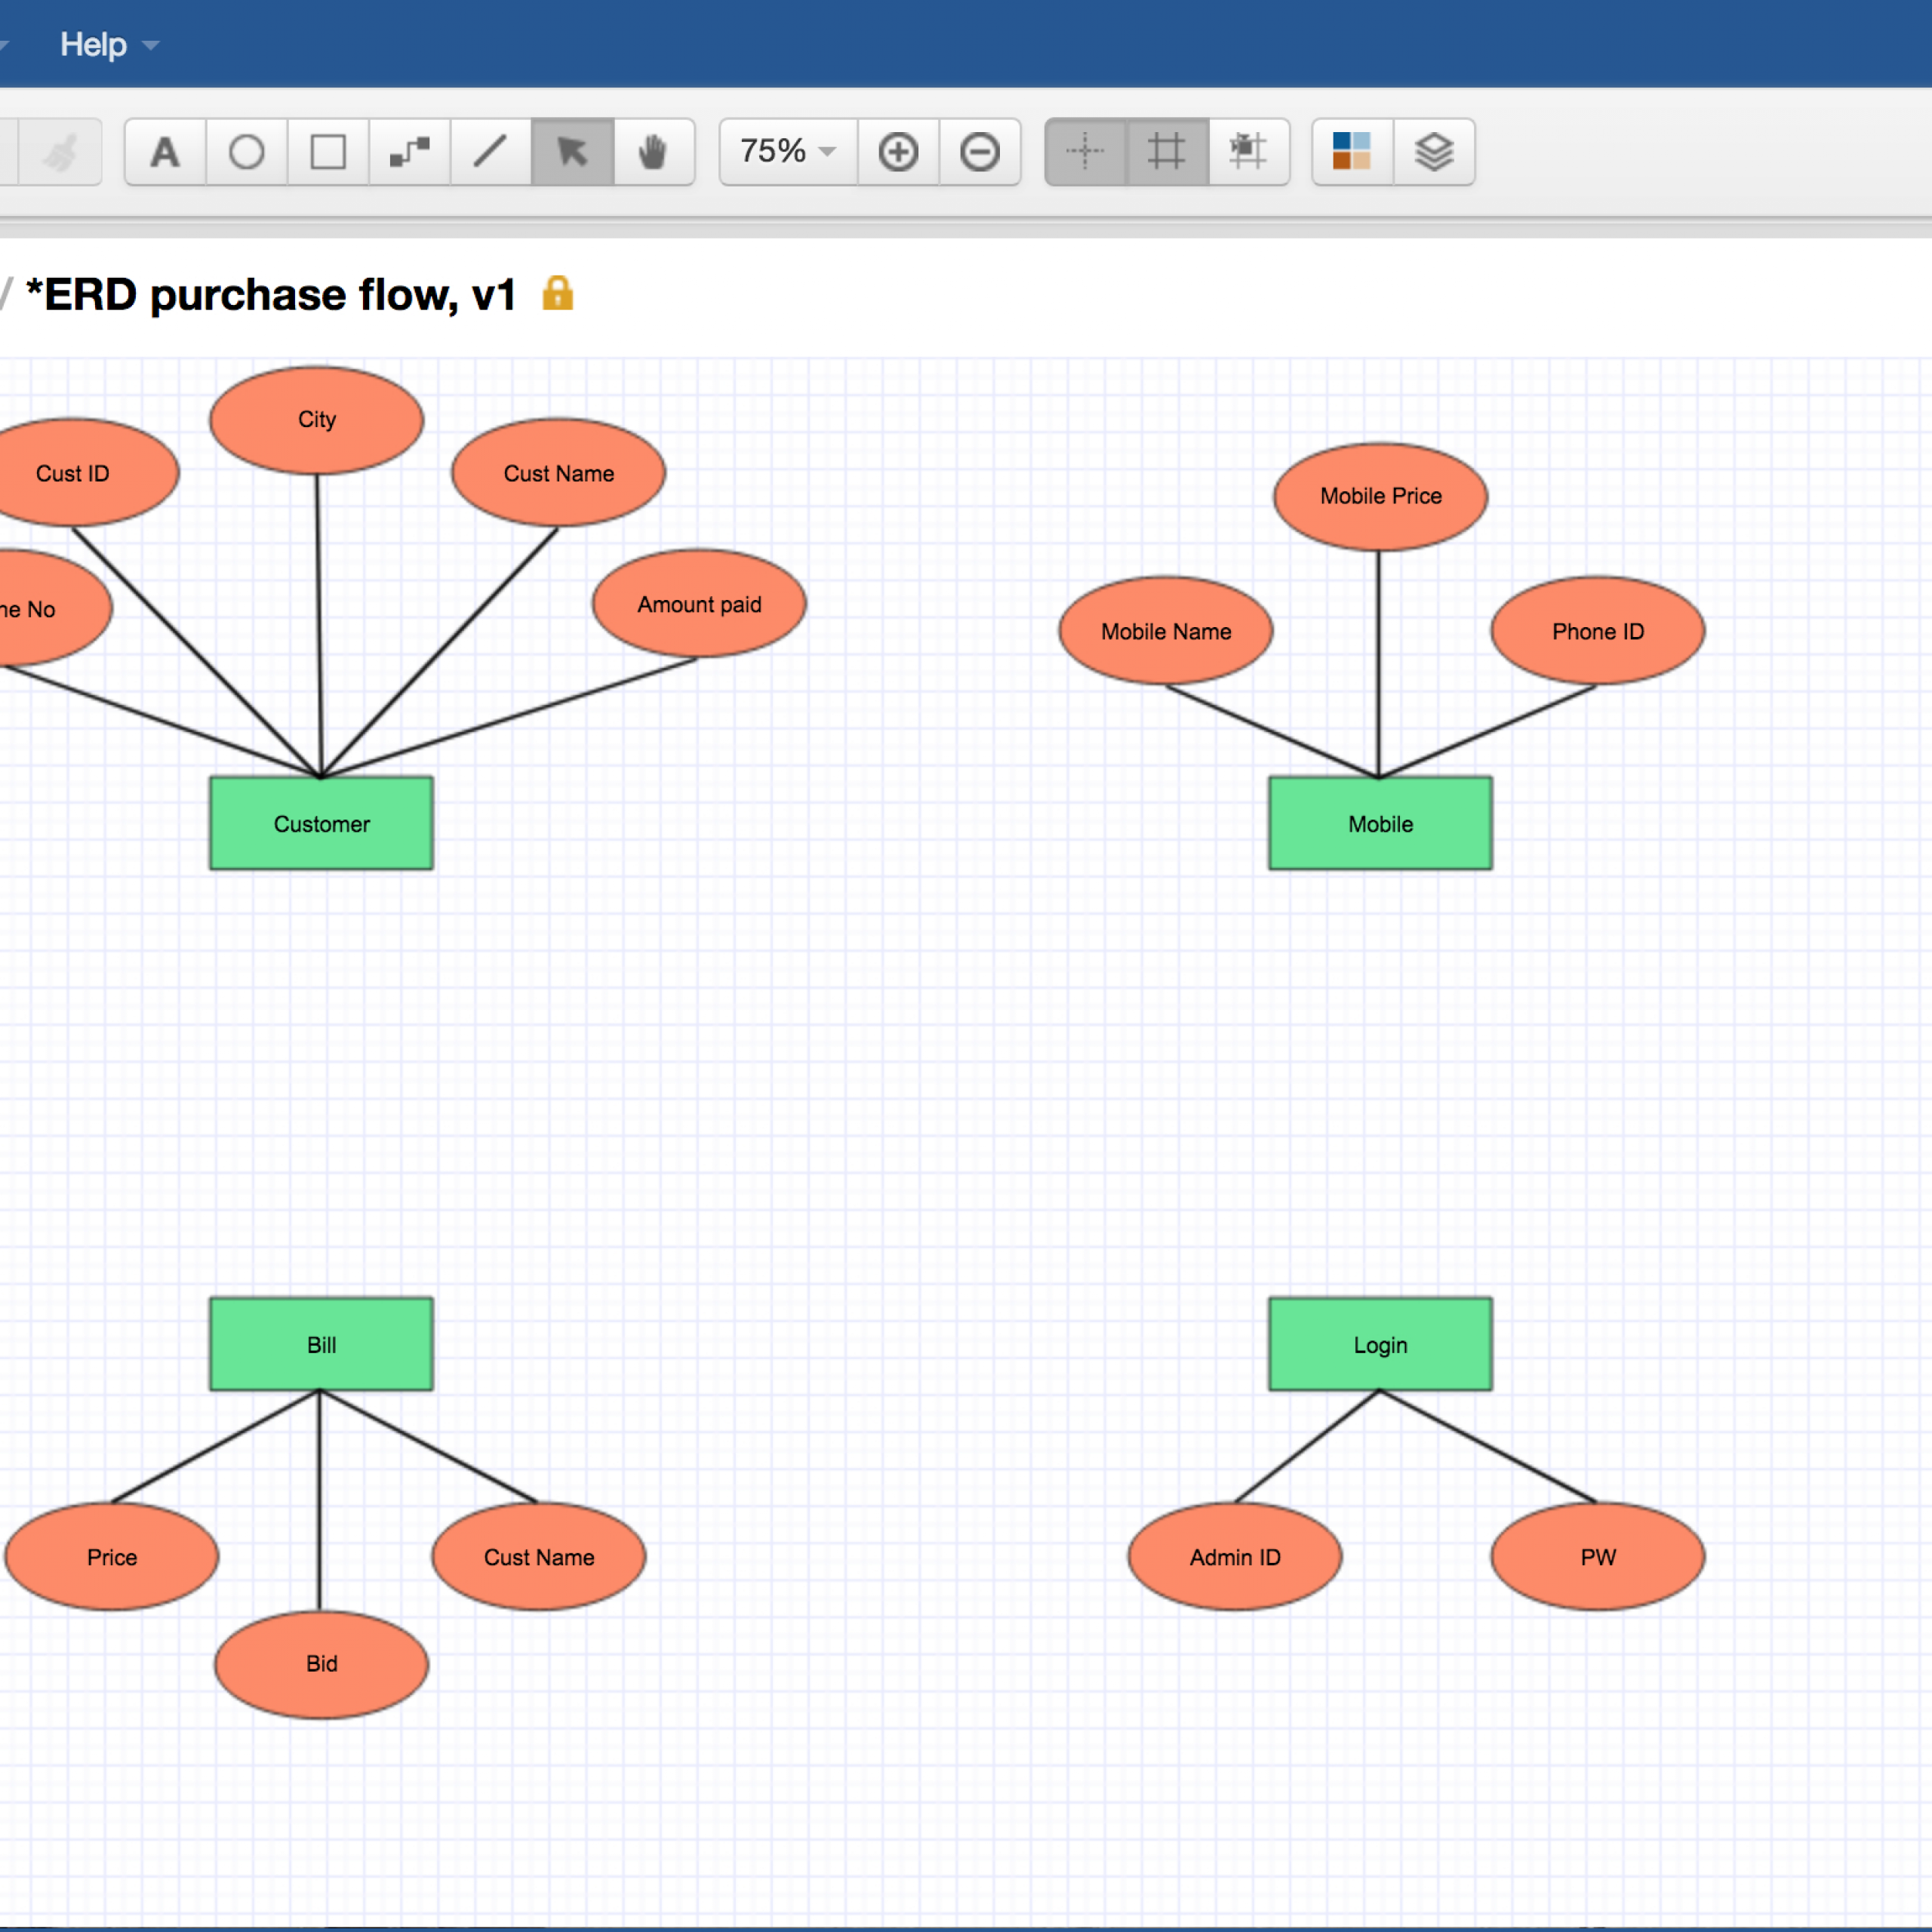 How To Draw An Entity-Relationship Diagram with regard to Entity Relationship Diagram Connectors